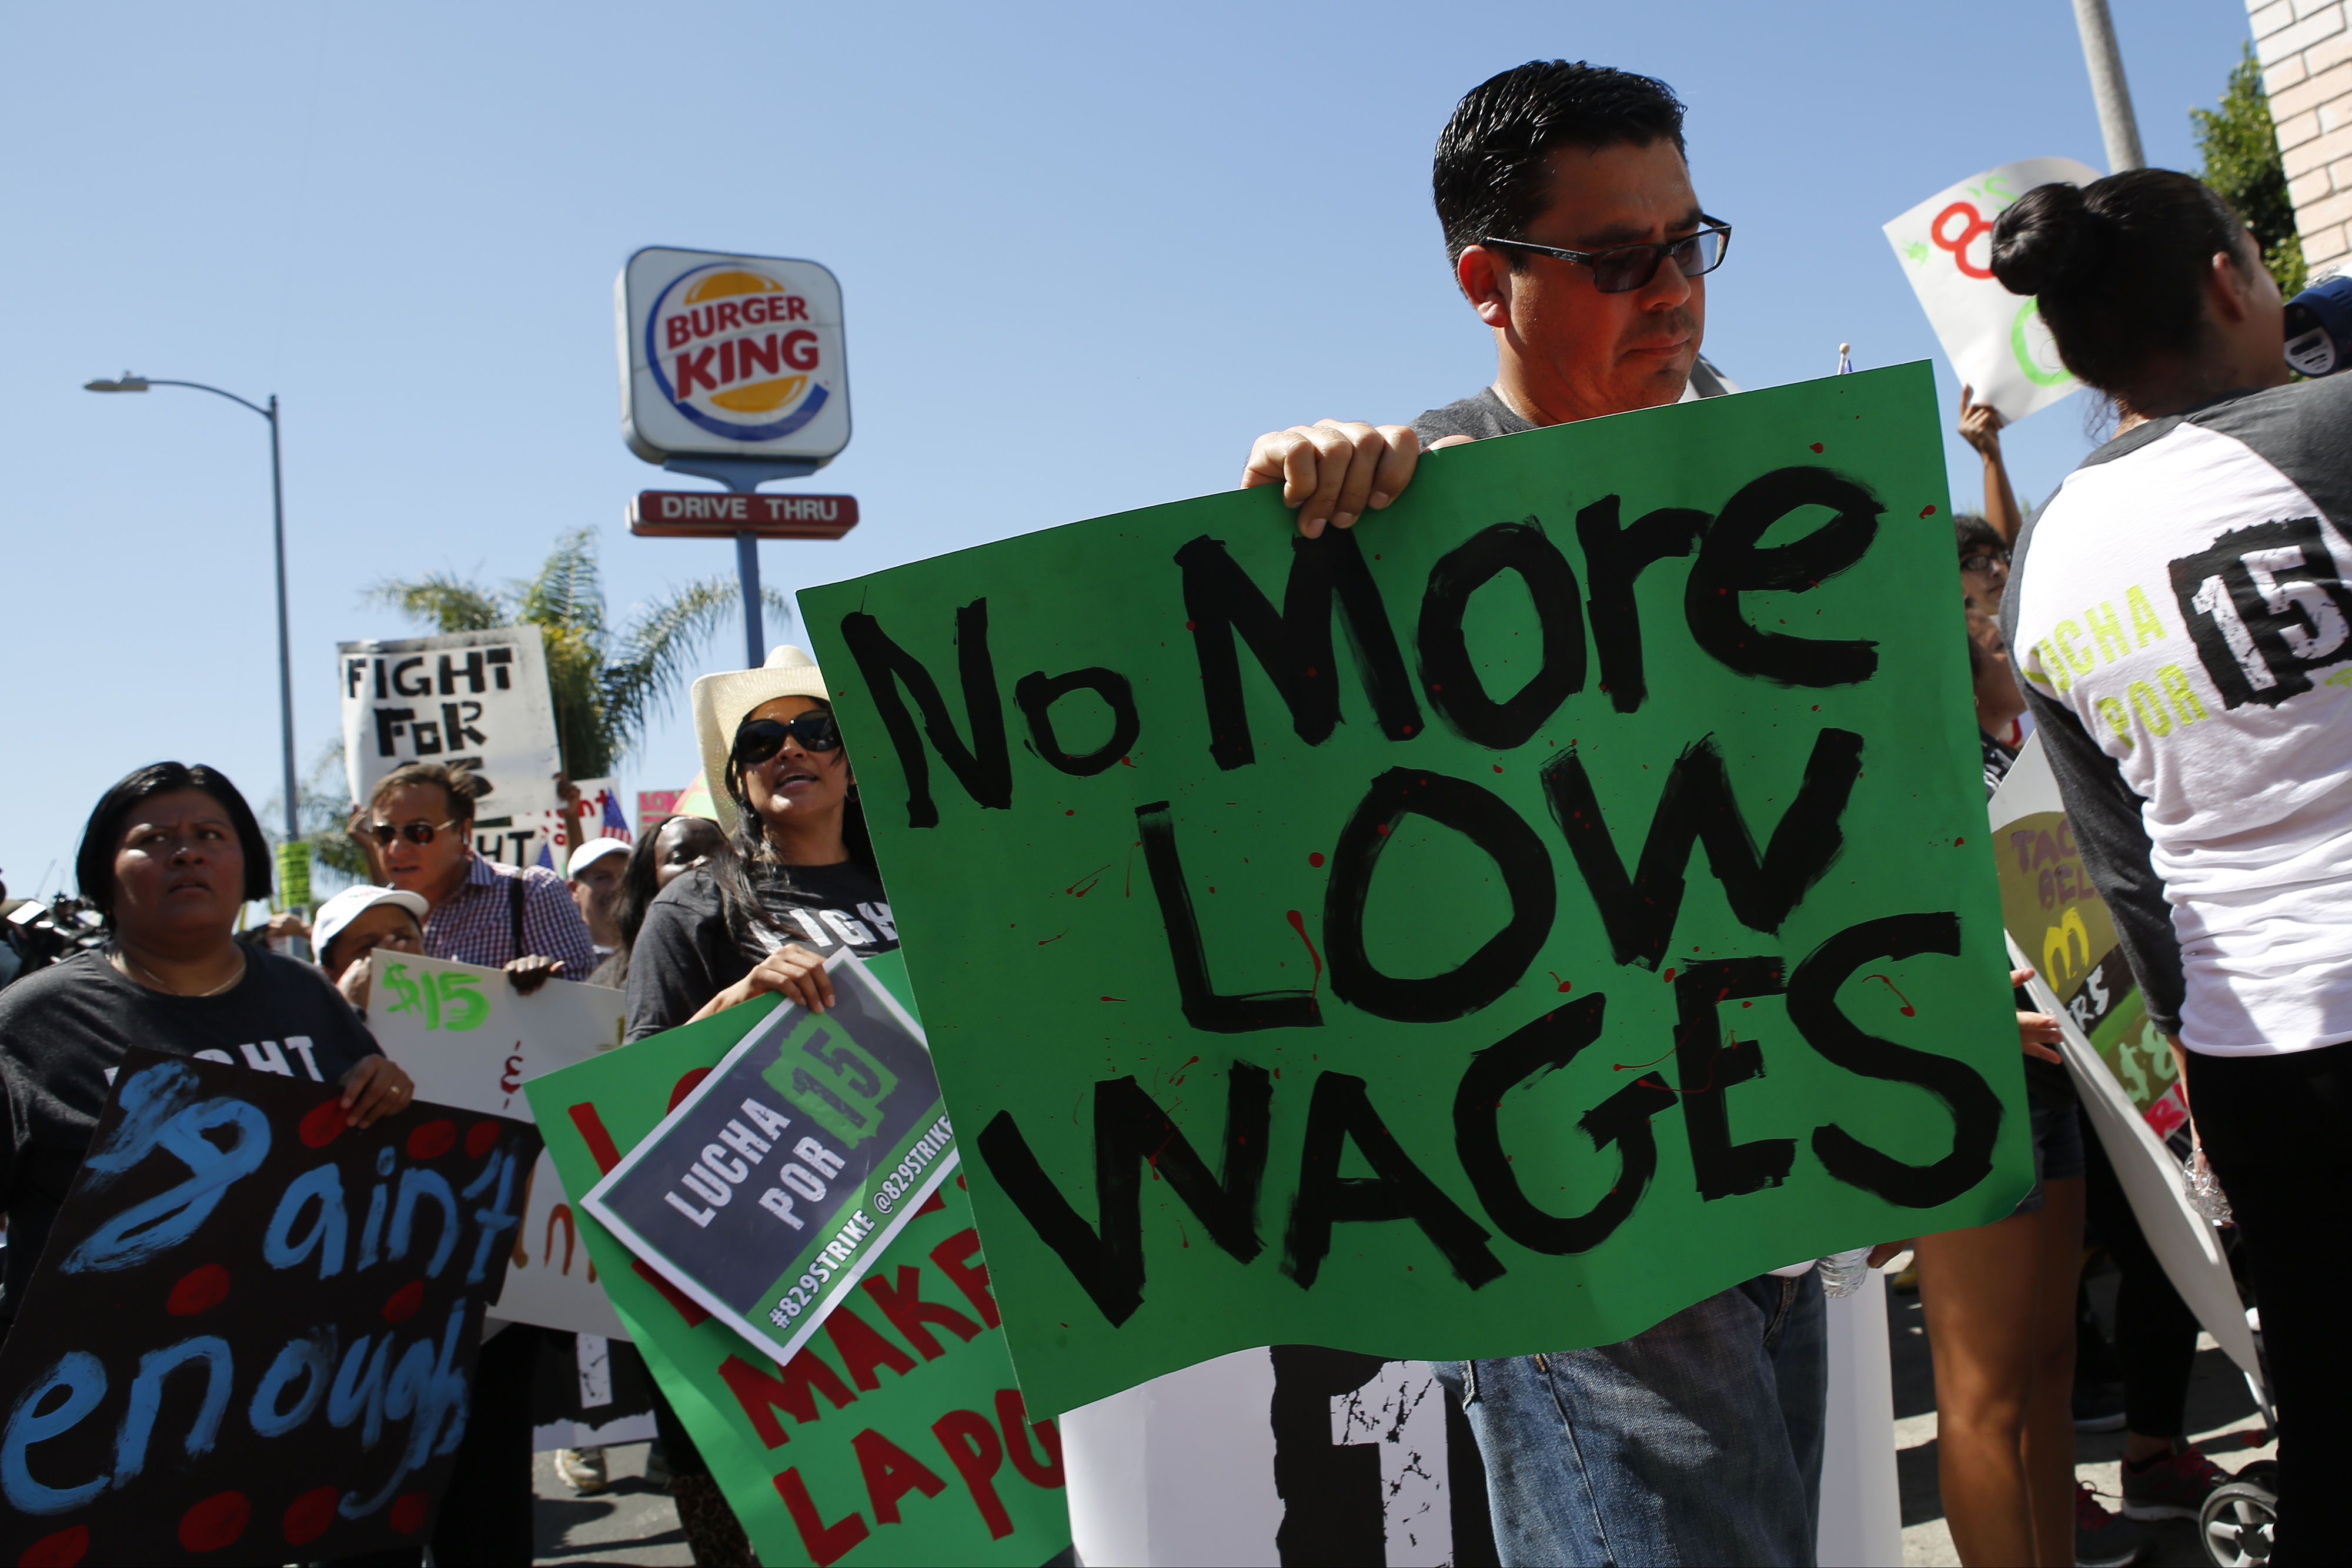 Fast-food workers and supporters organized by the Service Employees International Union (SEIU) protest outside of a Burger King Worldwide Inc. restaurant in Los Angeles, California, U.S., on Thursday, Aug. 29, 2013. (Bloomberg&mdash;Bloomberg via Getty Images)